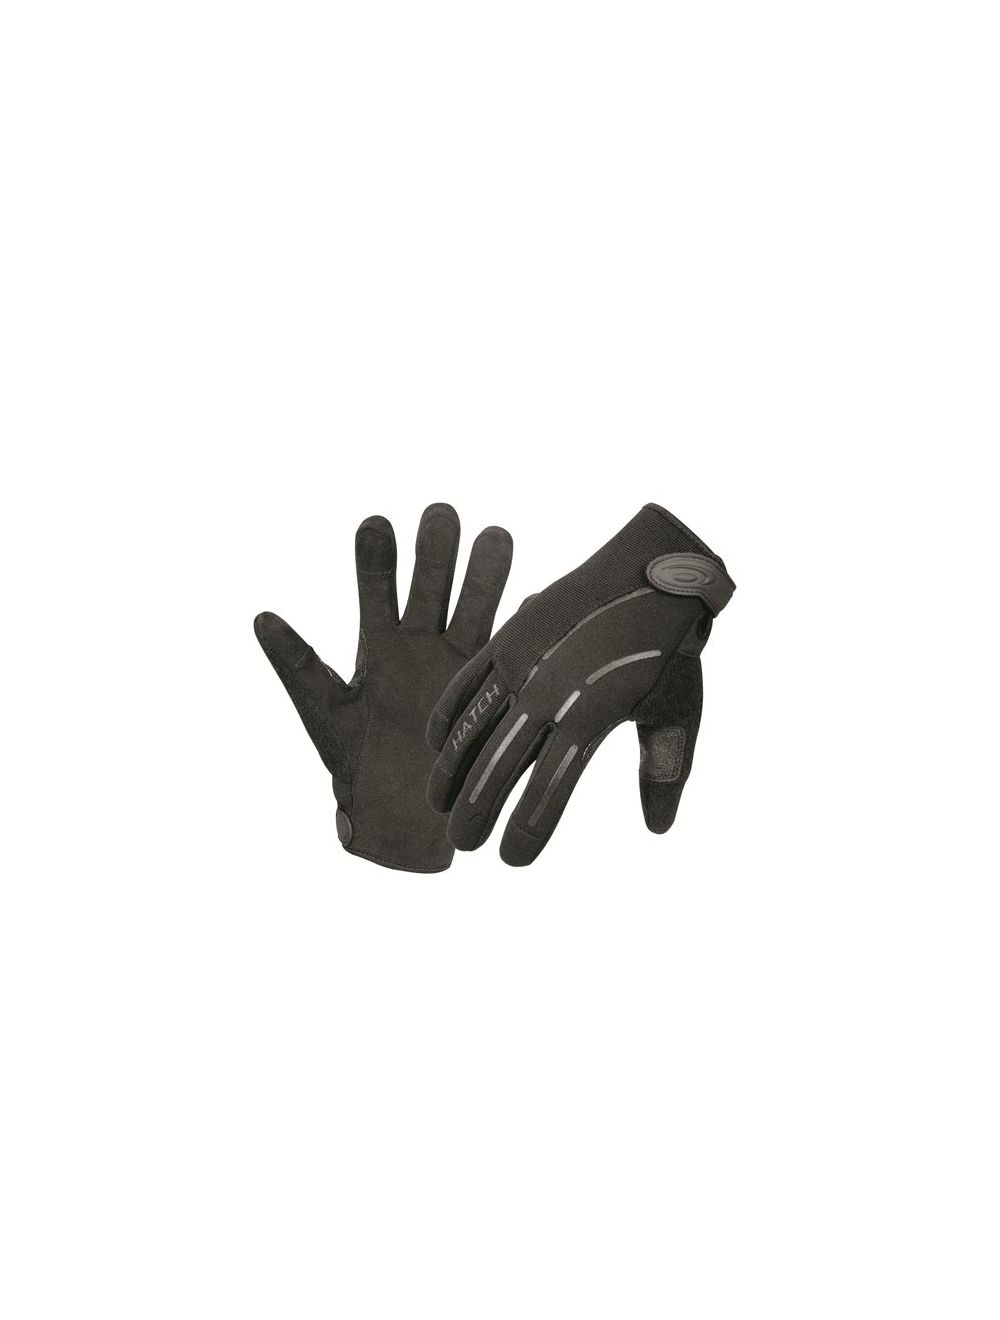 Cut-Resistant Tactical Police Duty Glove w/ ArmorTip Fingertips